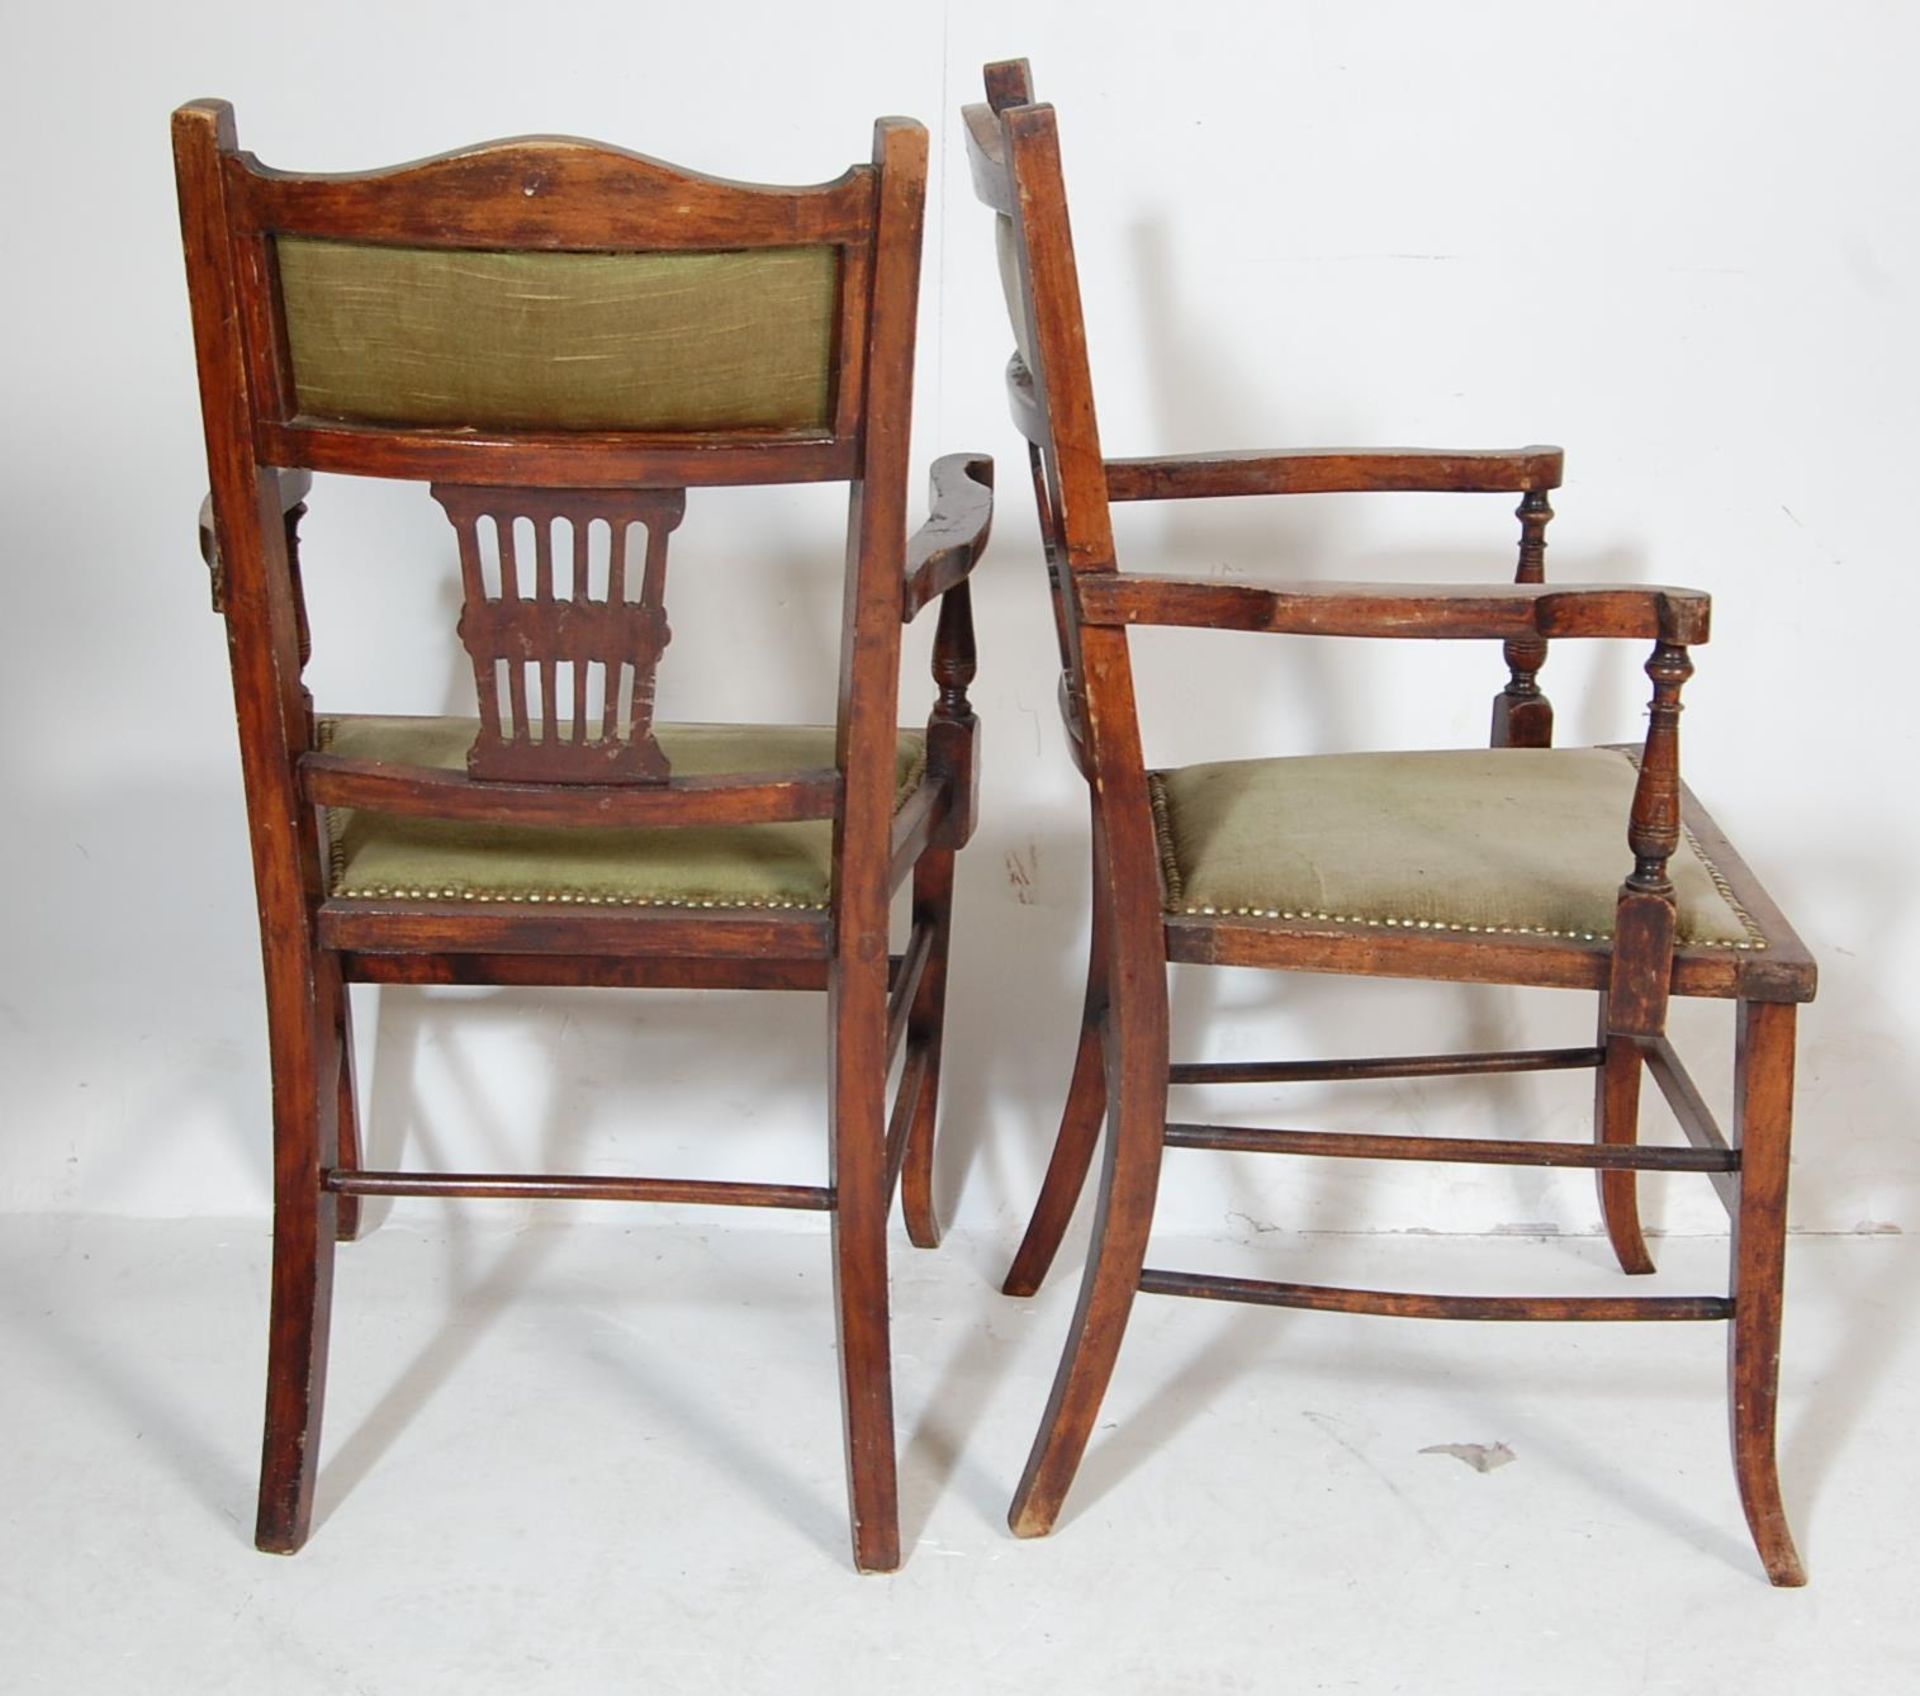 TWO 19TH CENTURY LATE VICTORIAN BEDROOM CHAIRS - Image 5 of 5